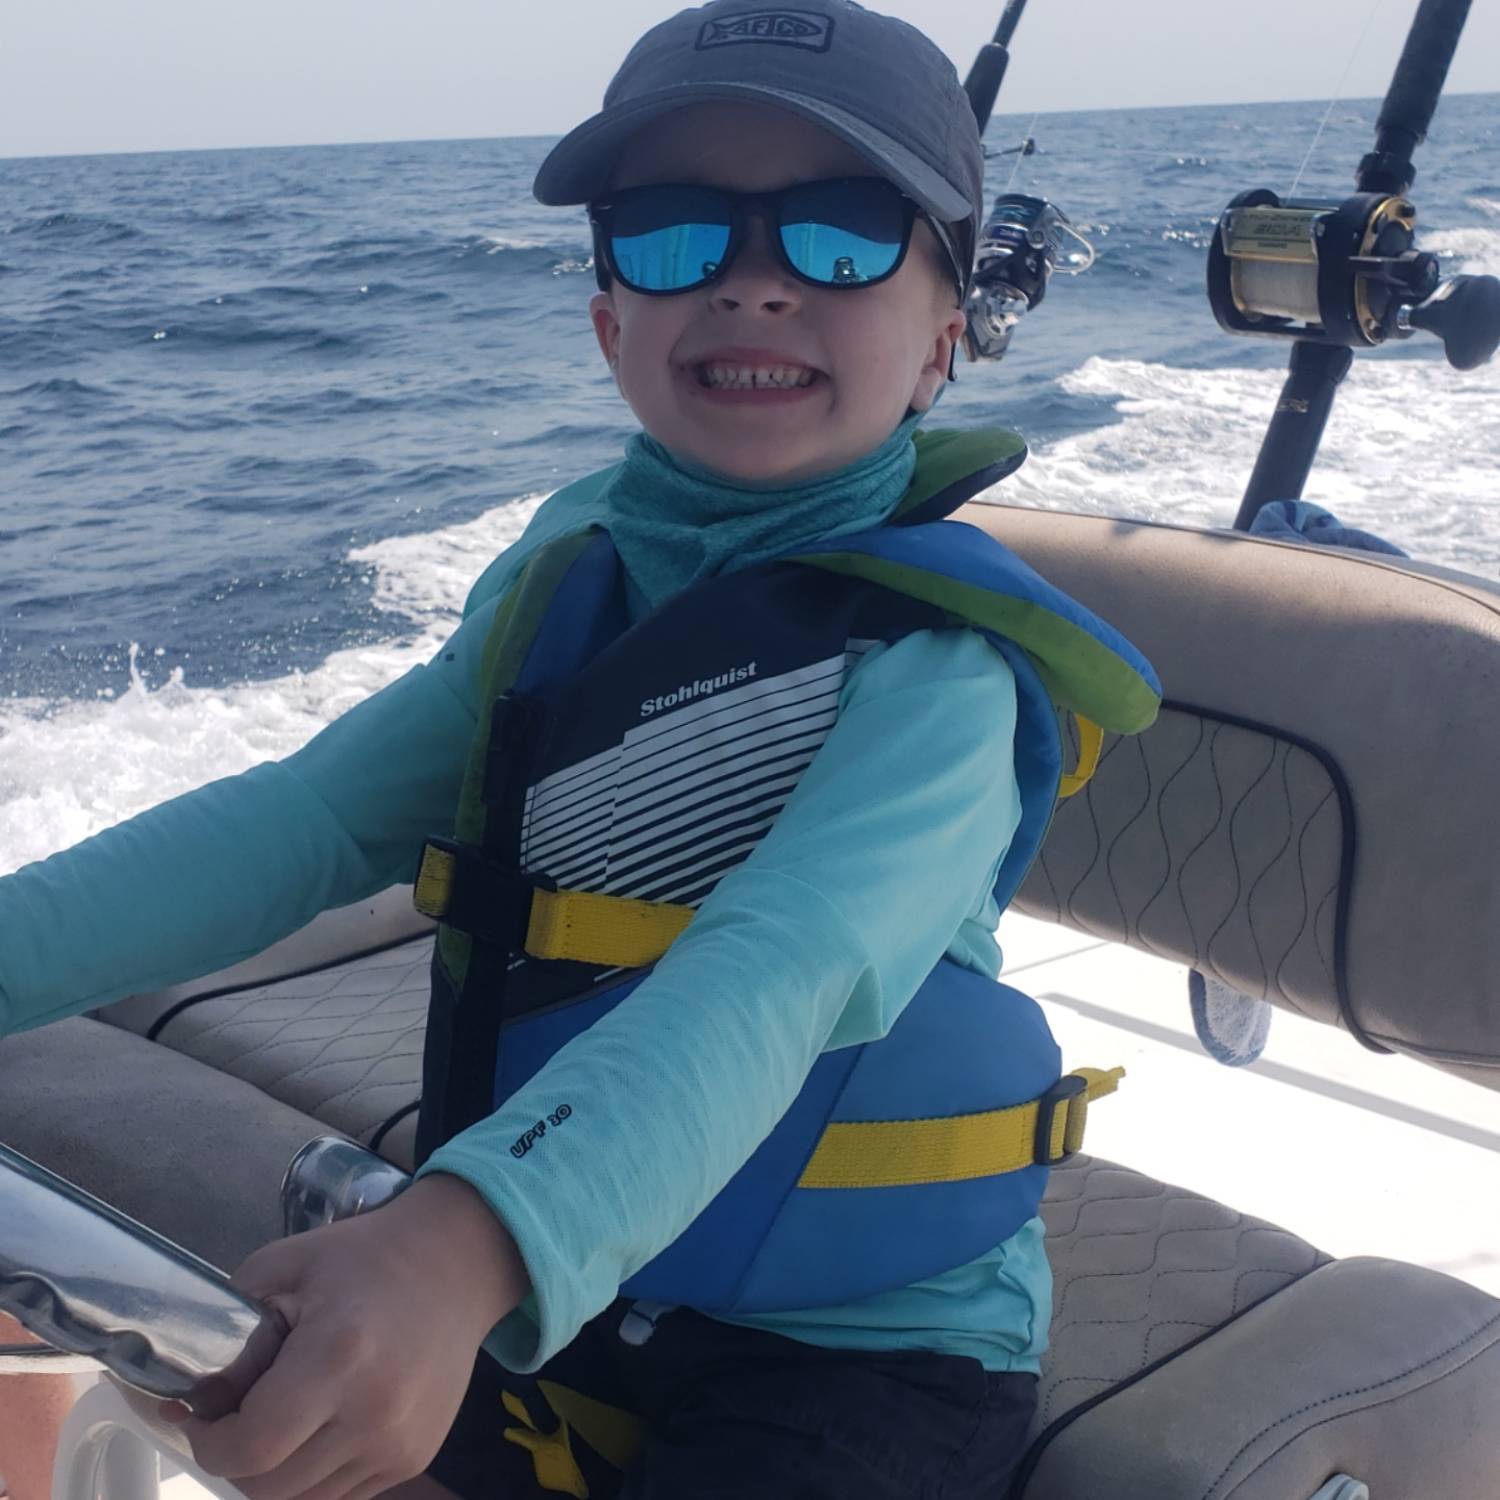 Spent the day offshore with my little skipper. He was at the helm for most of the day and loved...